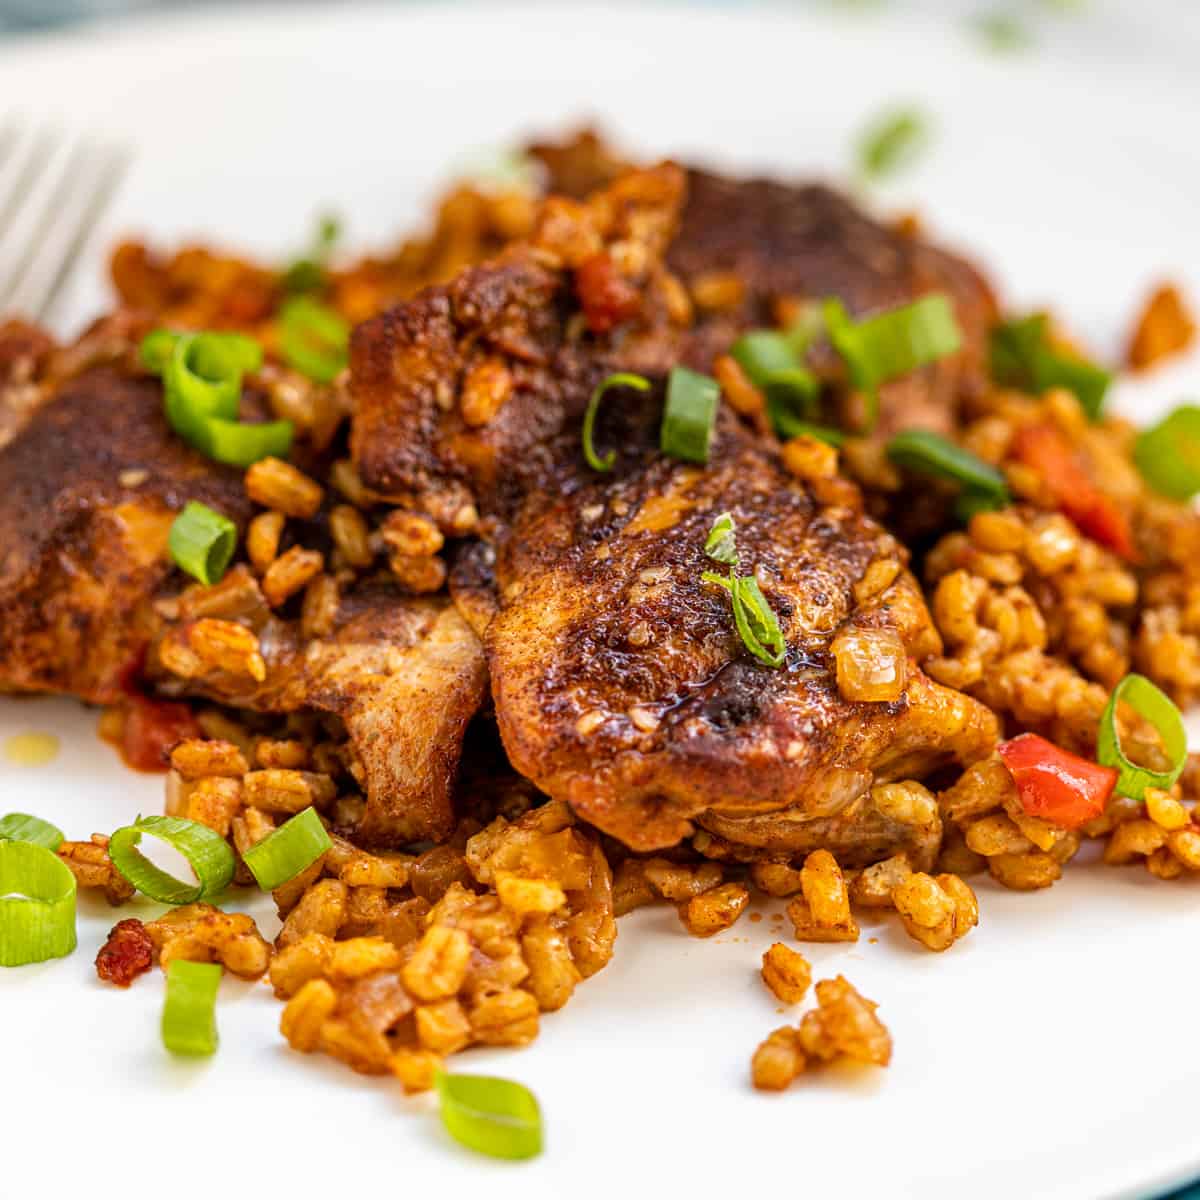 Moroccan spiced chicken smothered in barley